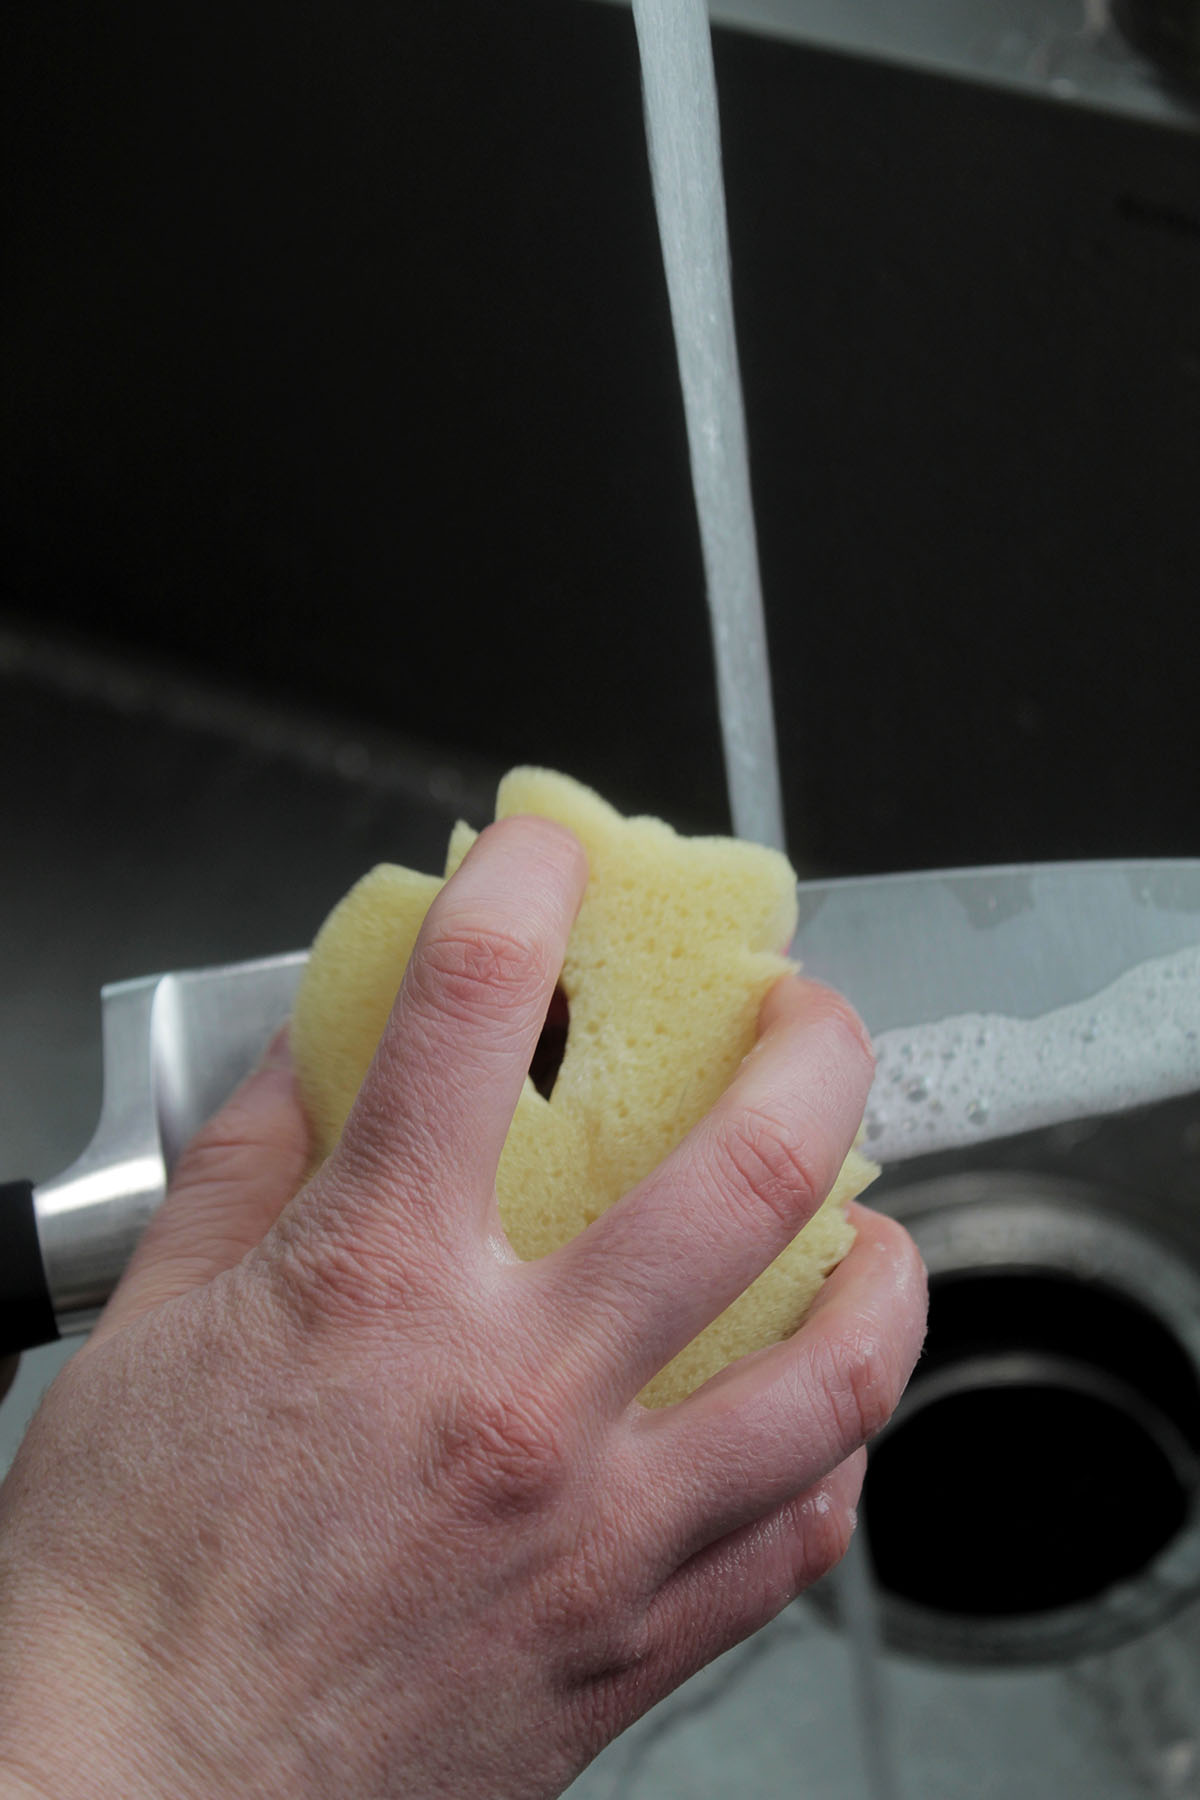 washing a chef's knife with a sponge.